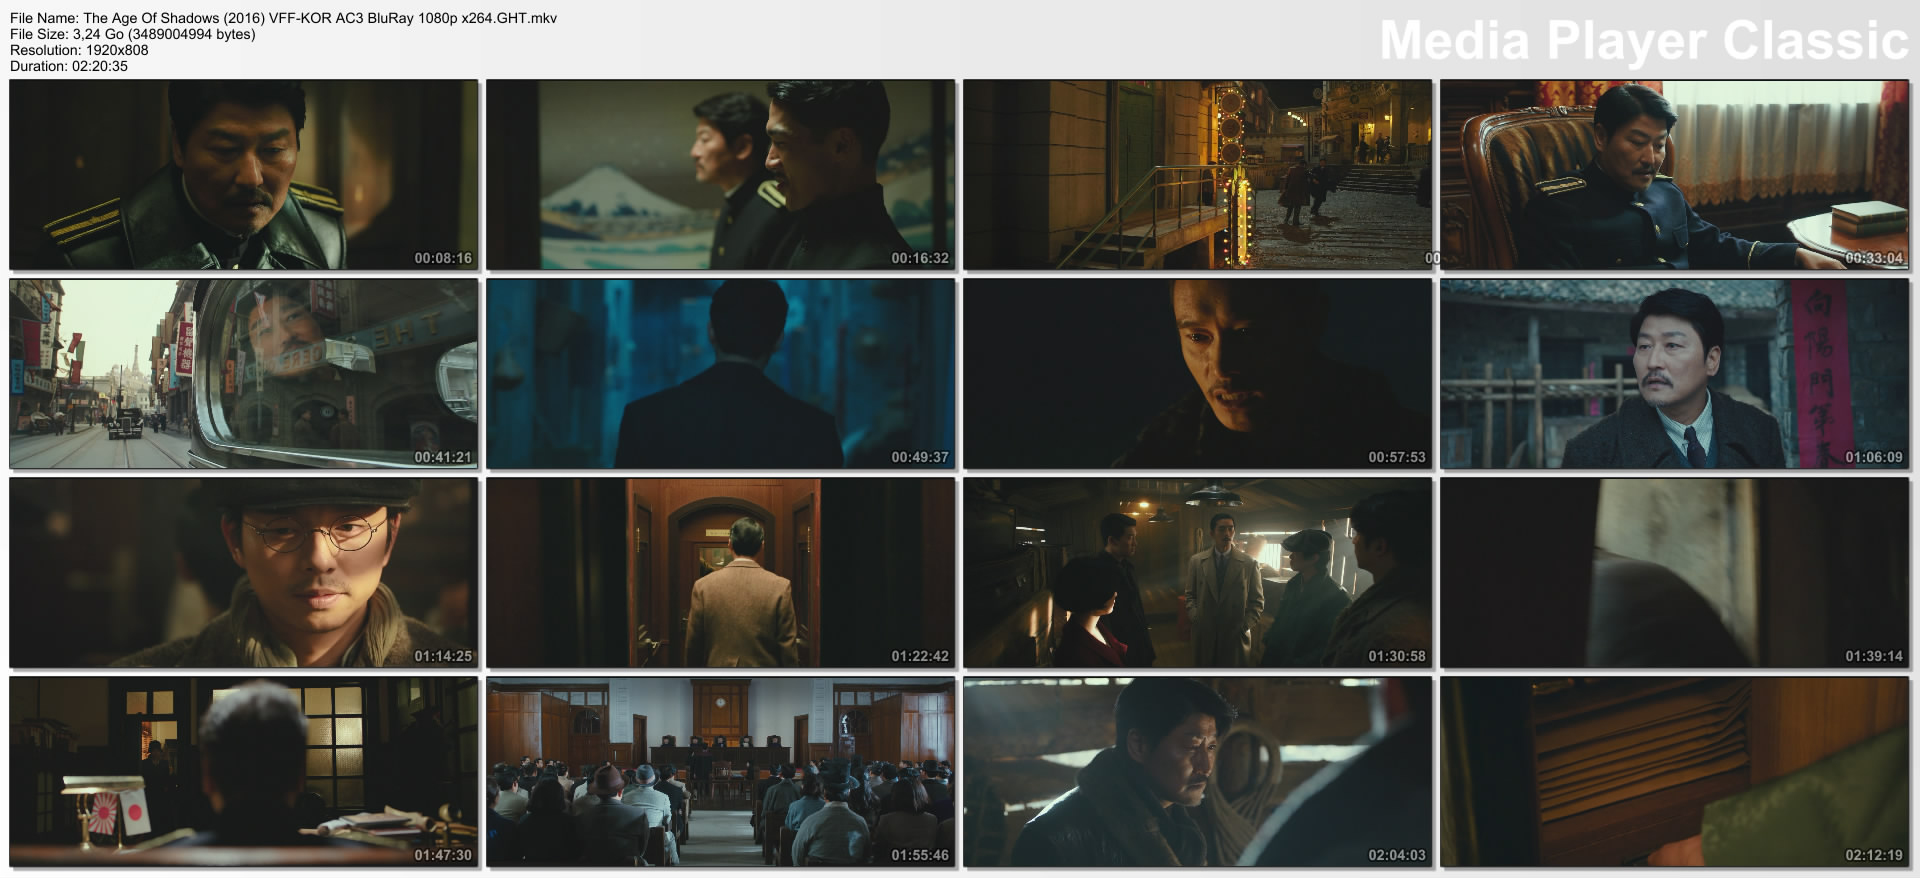 The Age Of Shadows (2016) VFF-KOR AC3 BluRay 1080p x264.GHT